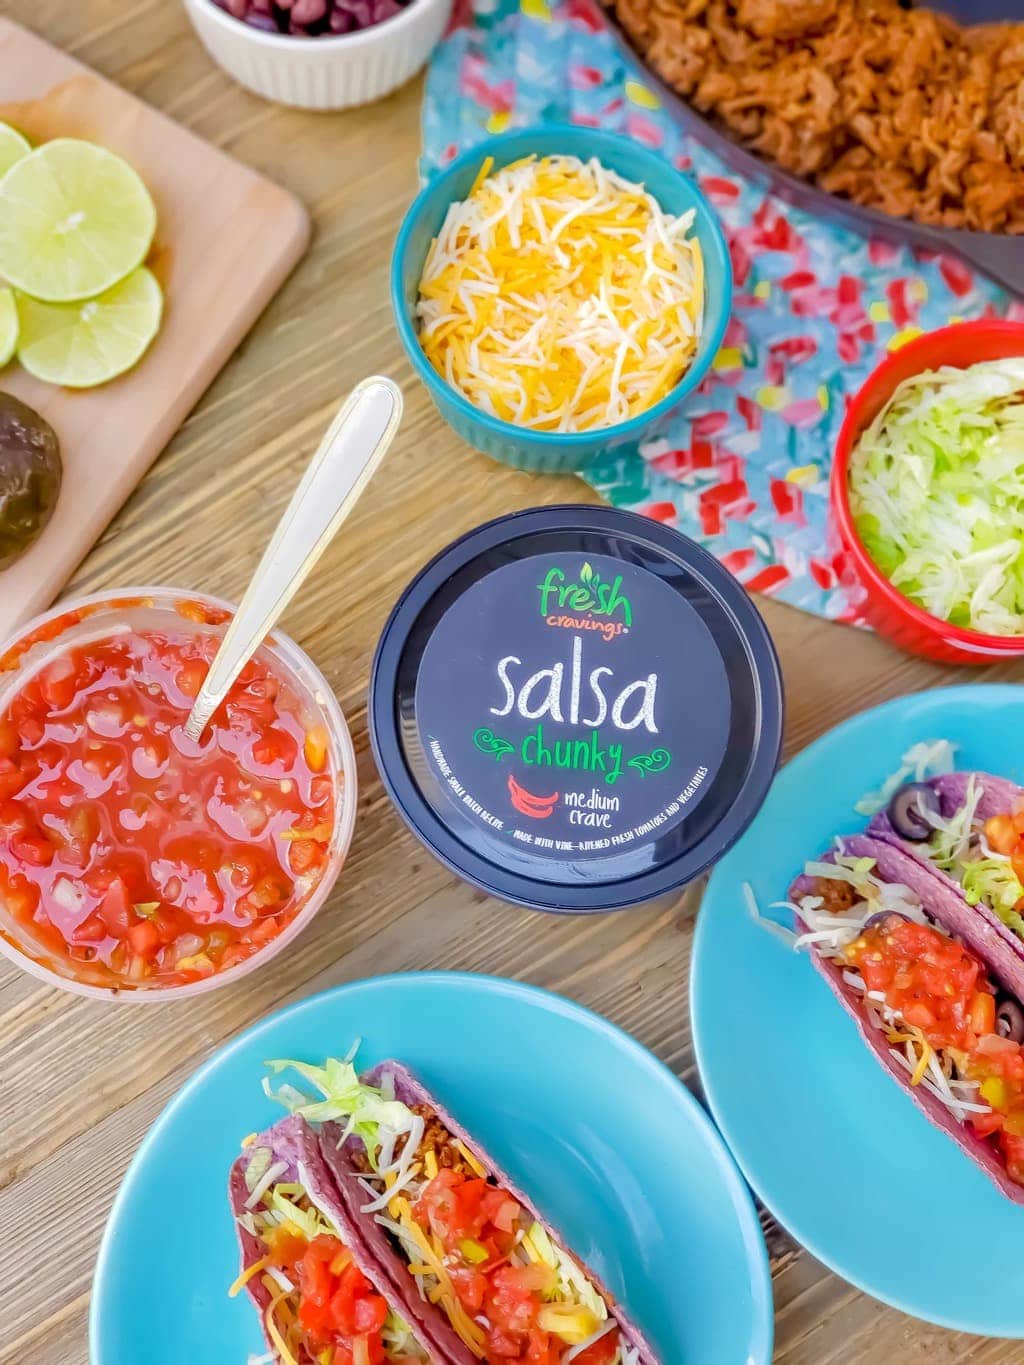 Taco Tuesday Night, Taco Ideas, Mexican Salsa with Tacos, Fresh Cravings Salsa, Taco Tuesday Tradition